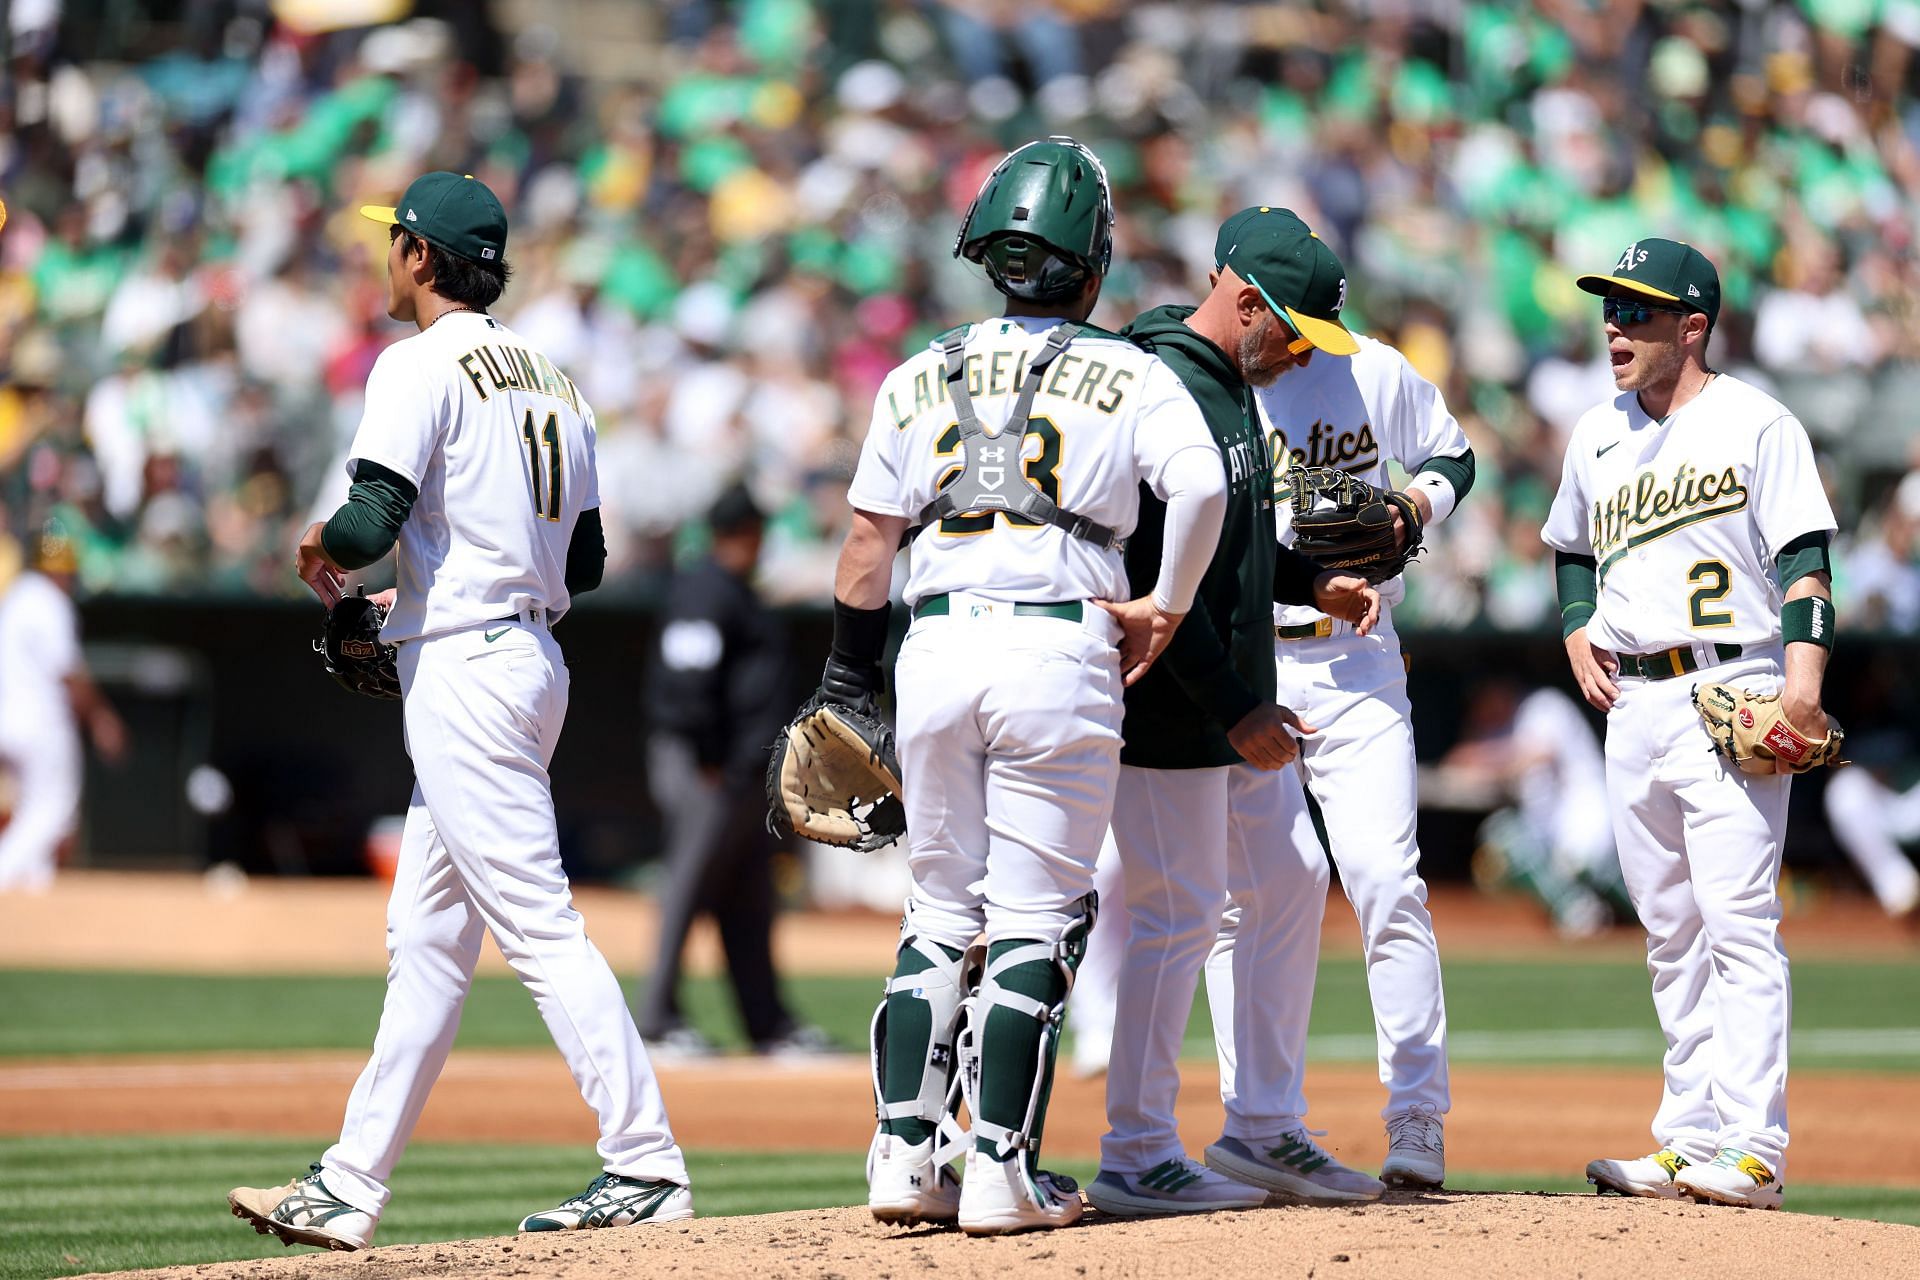 Road teams sweep unusual A's-Tigers doubleheader – The Oakland Press